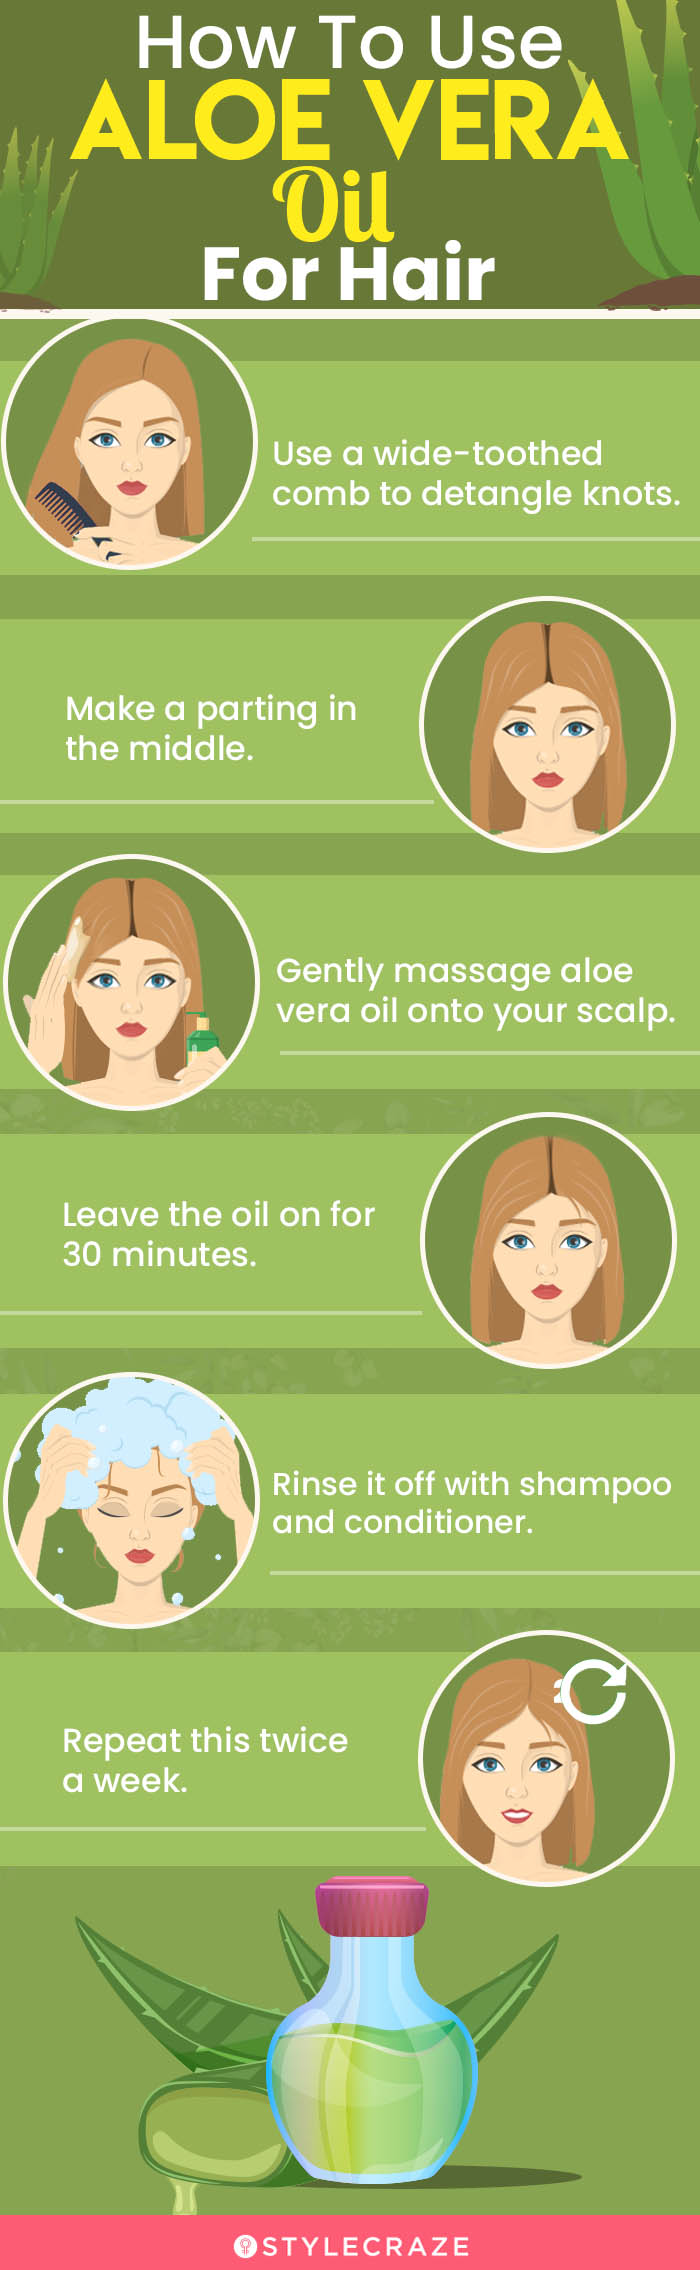 how to use aloe vera oil for hair (infographic)